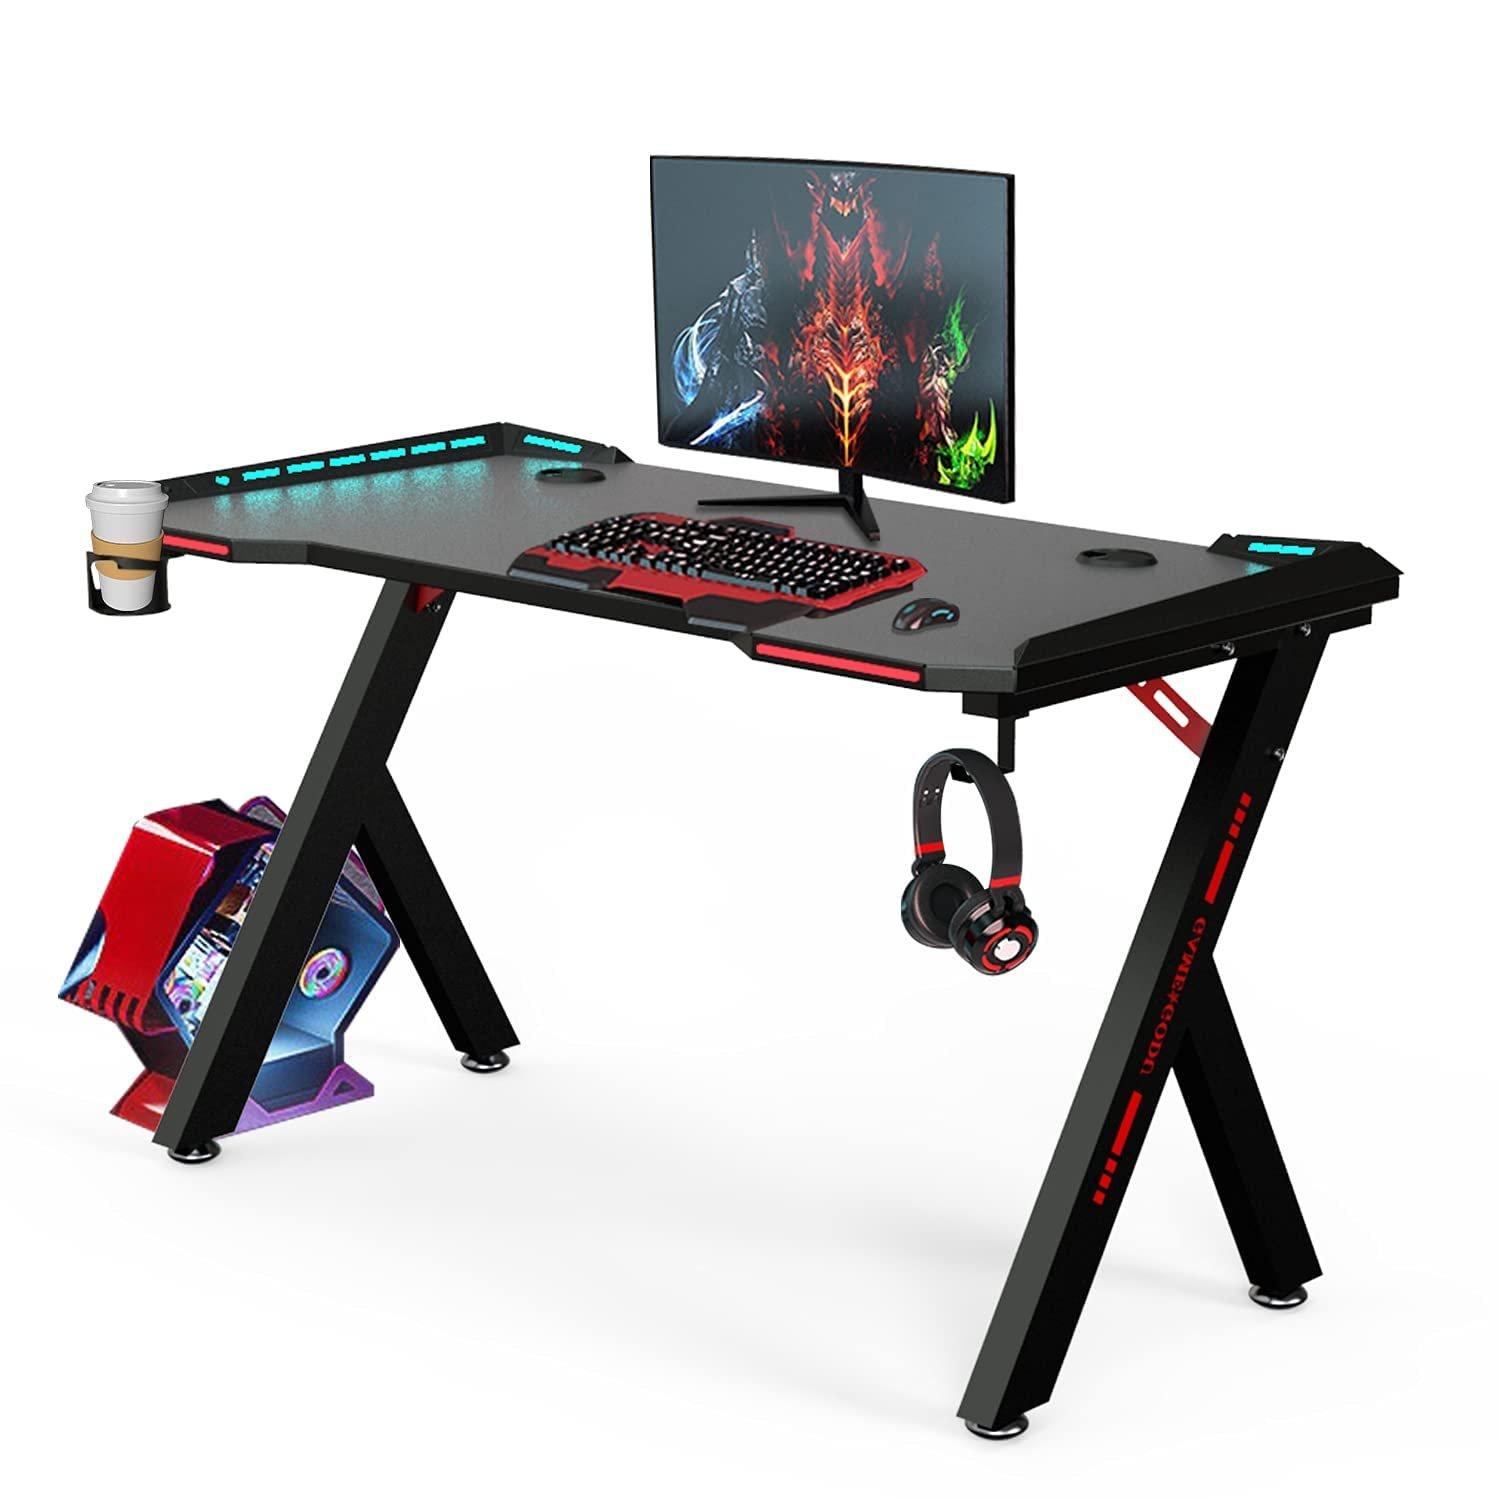 RGB Gaming Desk, Large Gaming with Headphone Hook and Cup Holder for Laptop Home Office